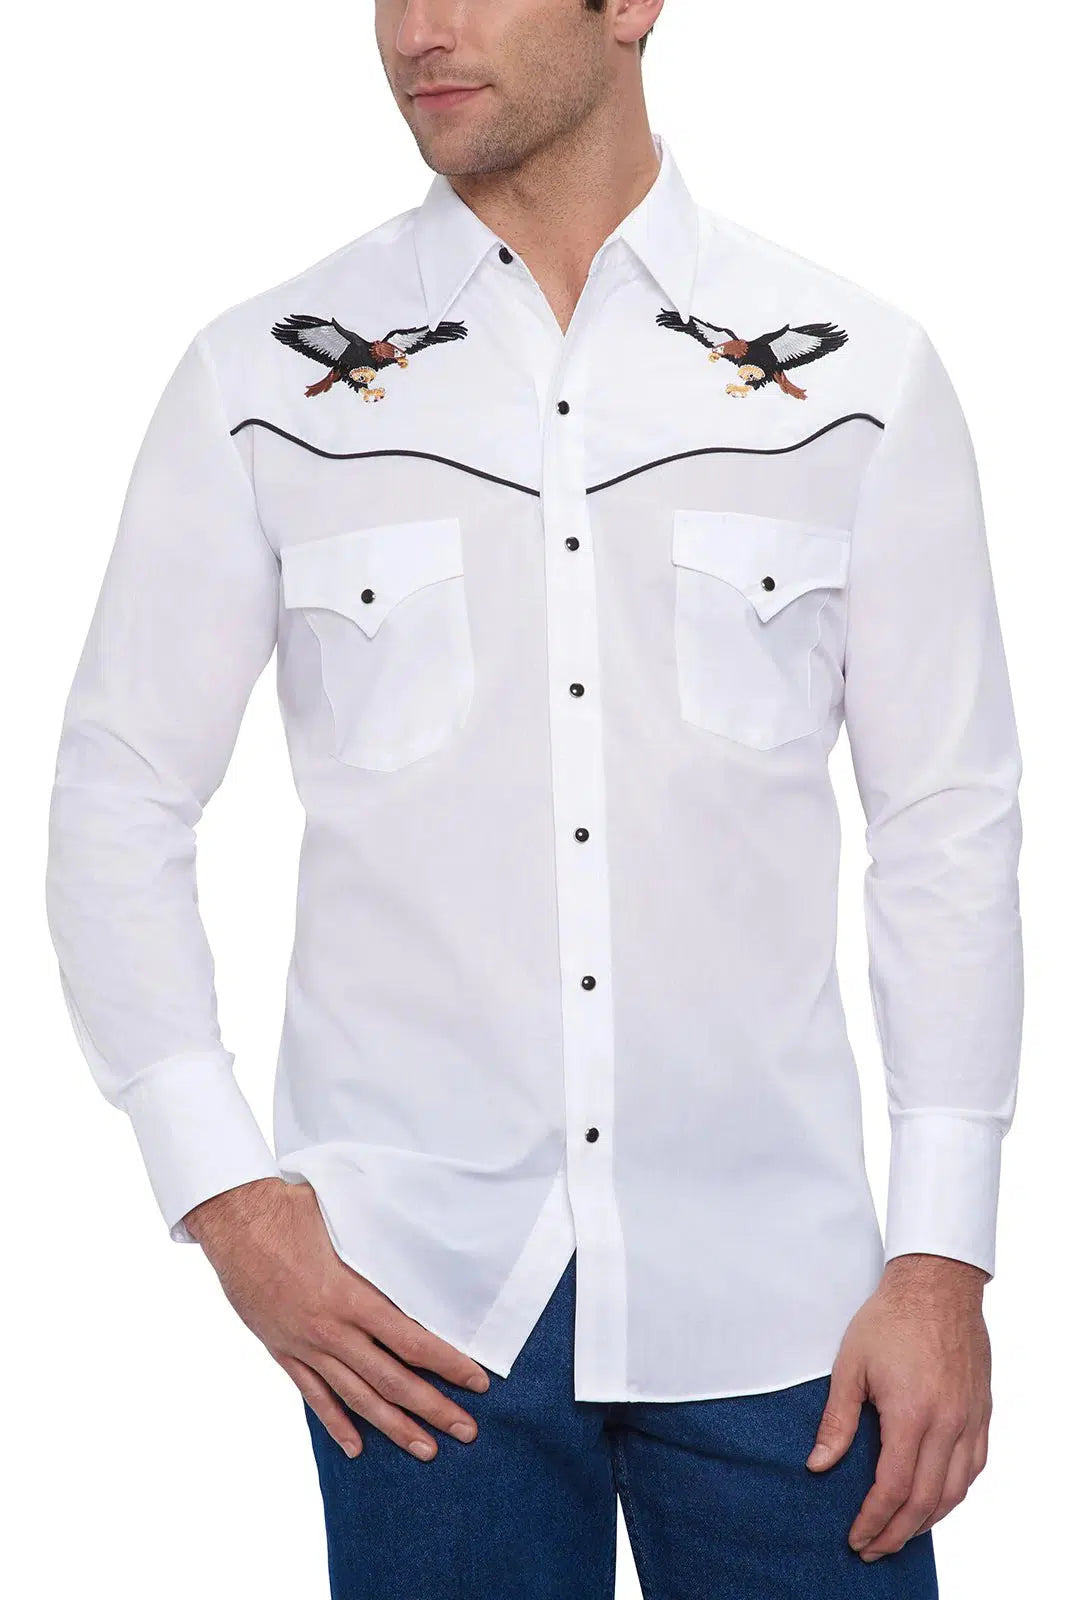 A man wearing an ELY Mens Embroidered Eagle Western Shirt, by Ely, against a white background